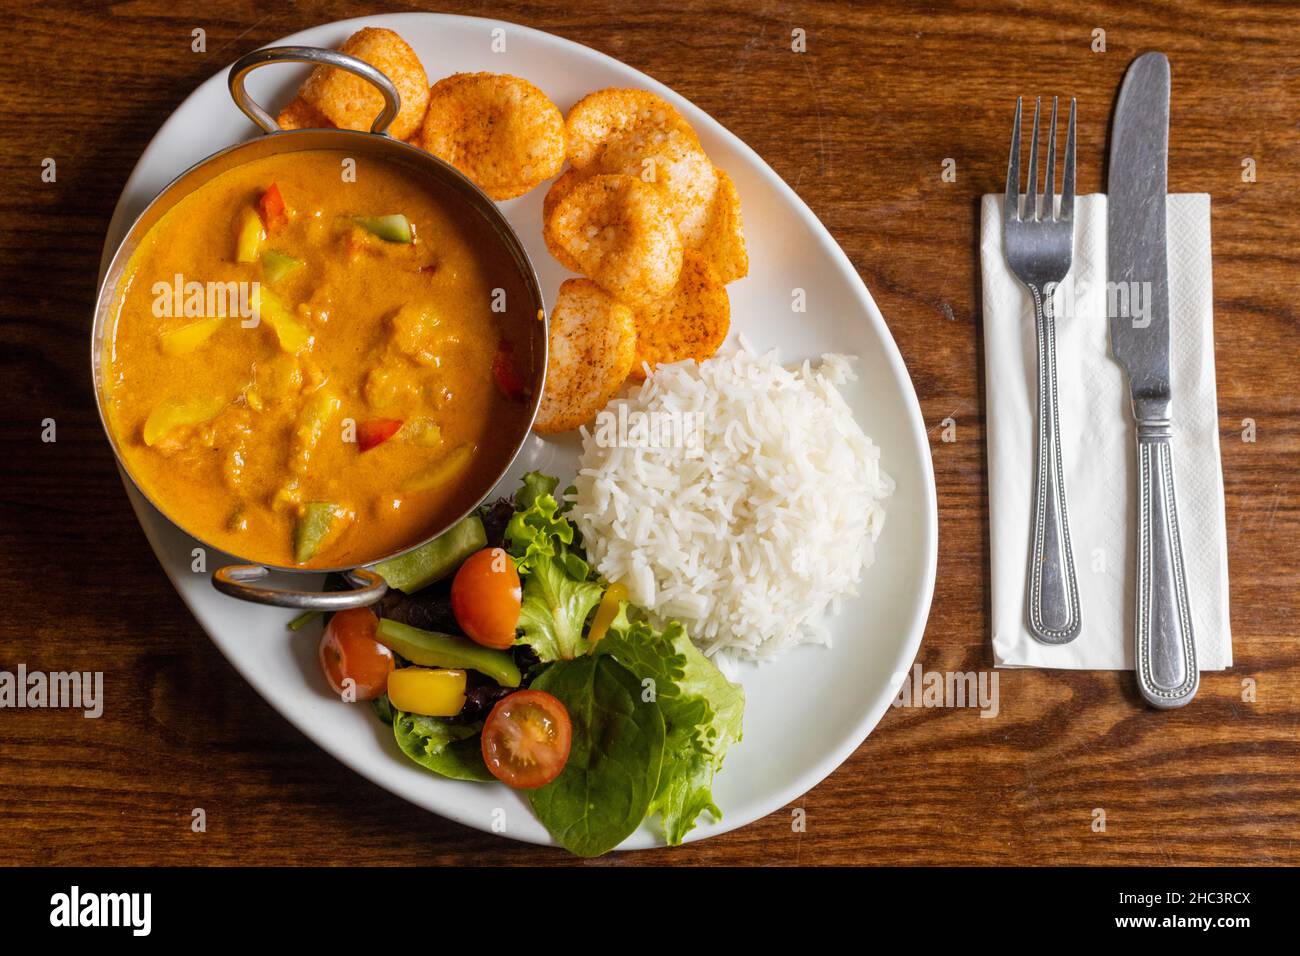 Top view of delicious lunch with rice, soup with colorful peppers, and salad Stock Photo